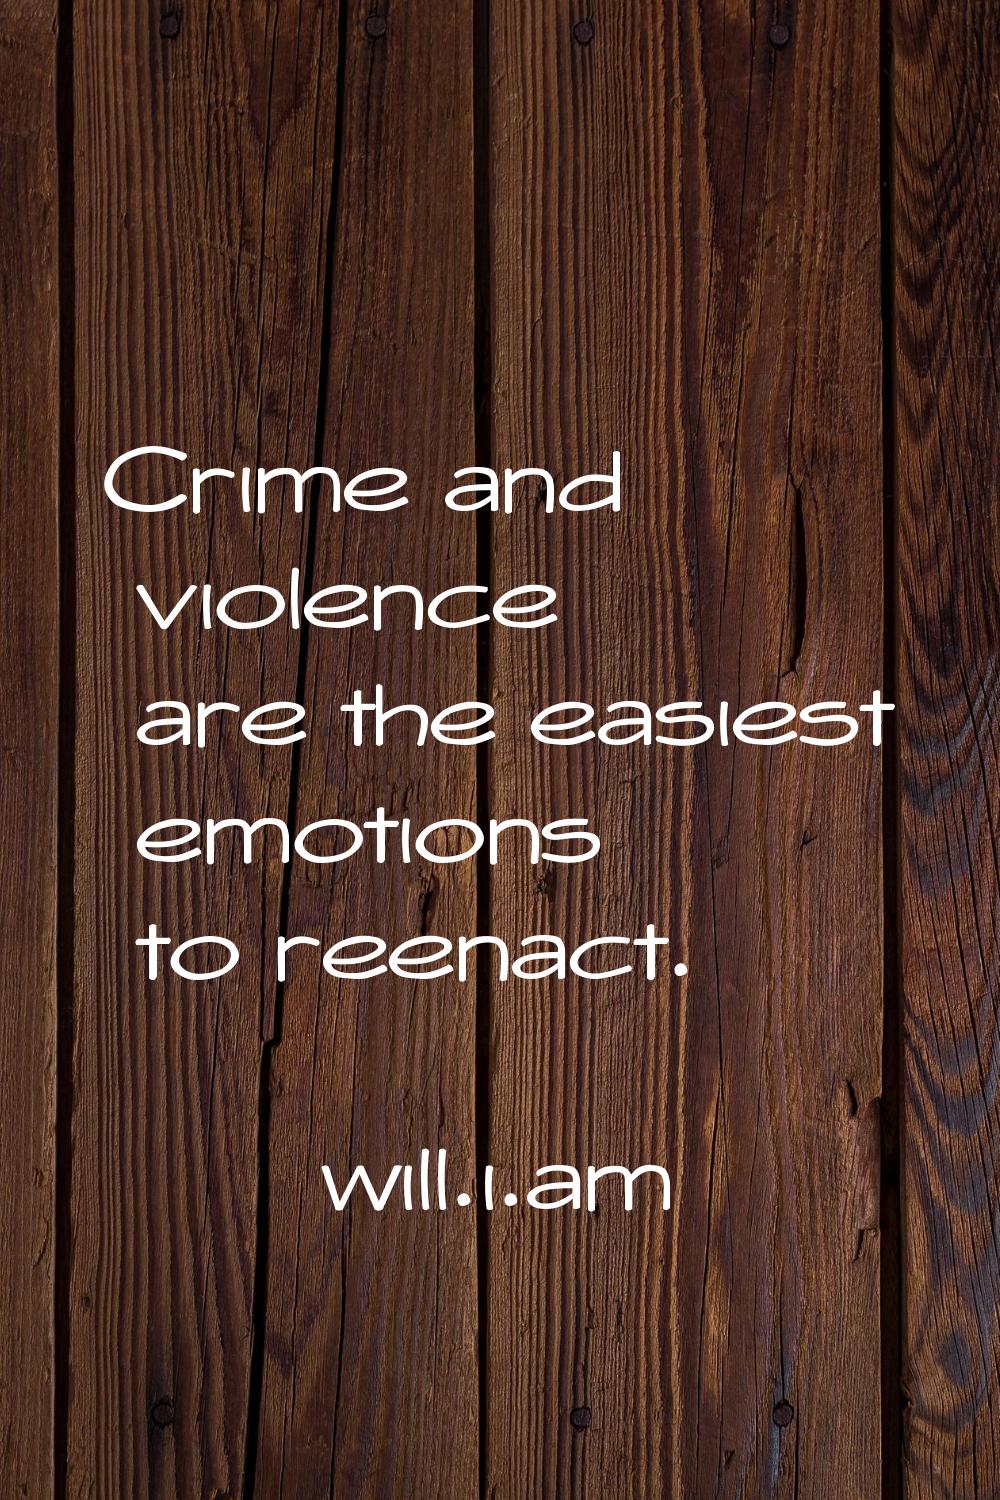 Crime and violence are the easiest emotions to reenact.